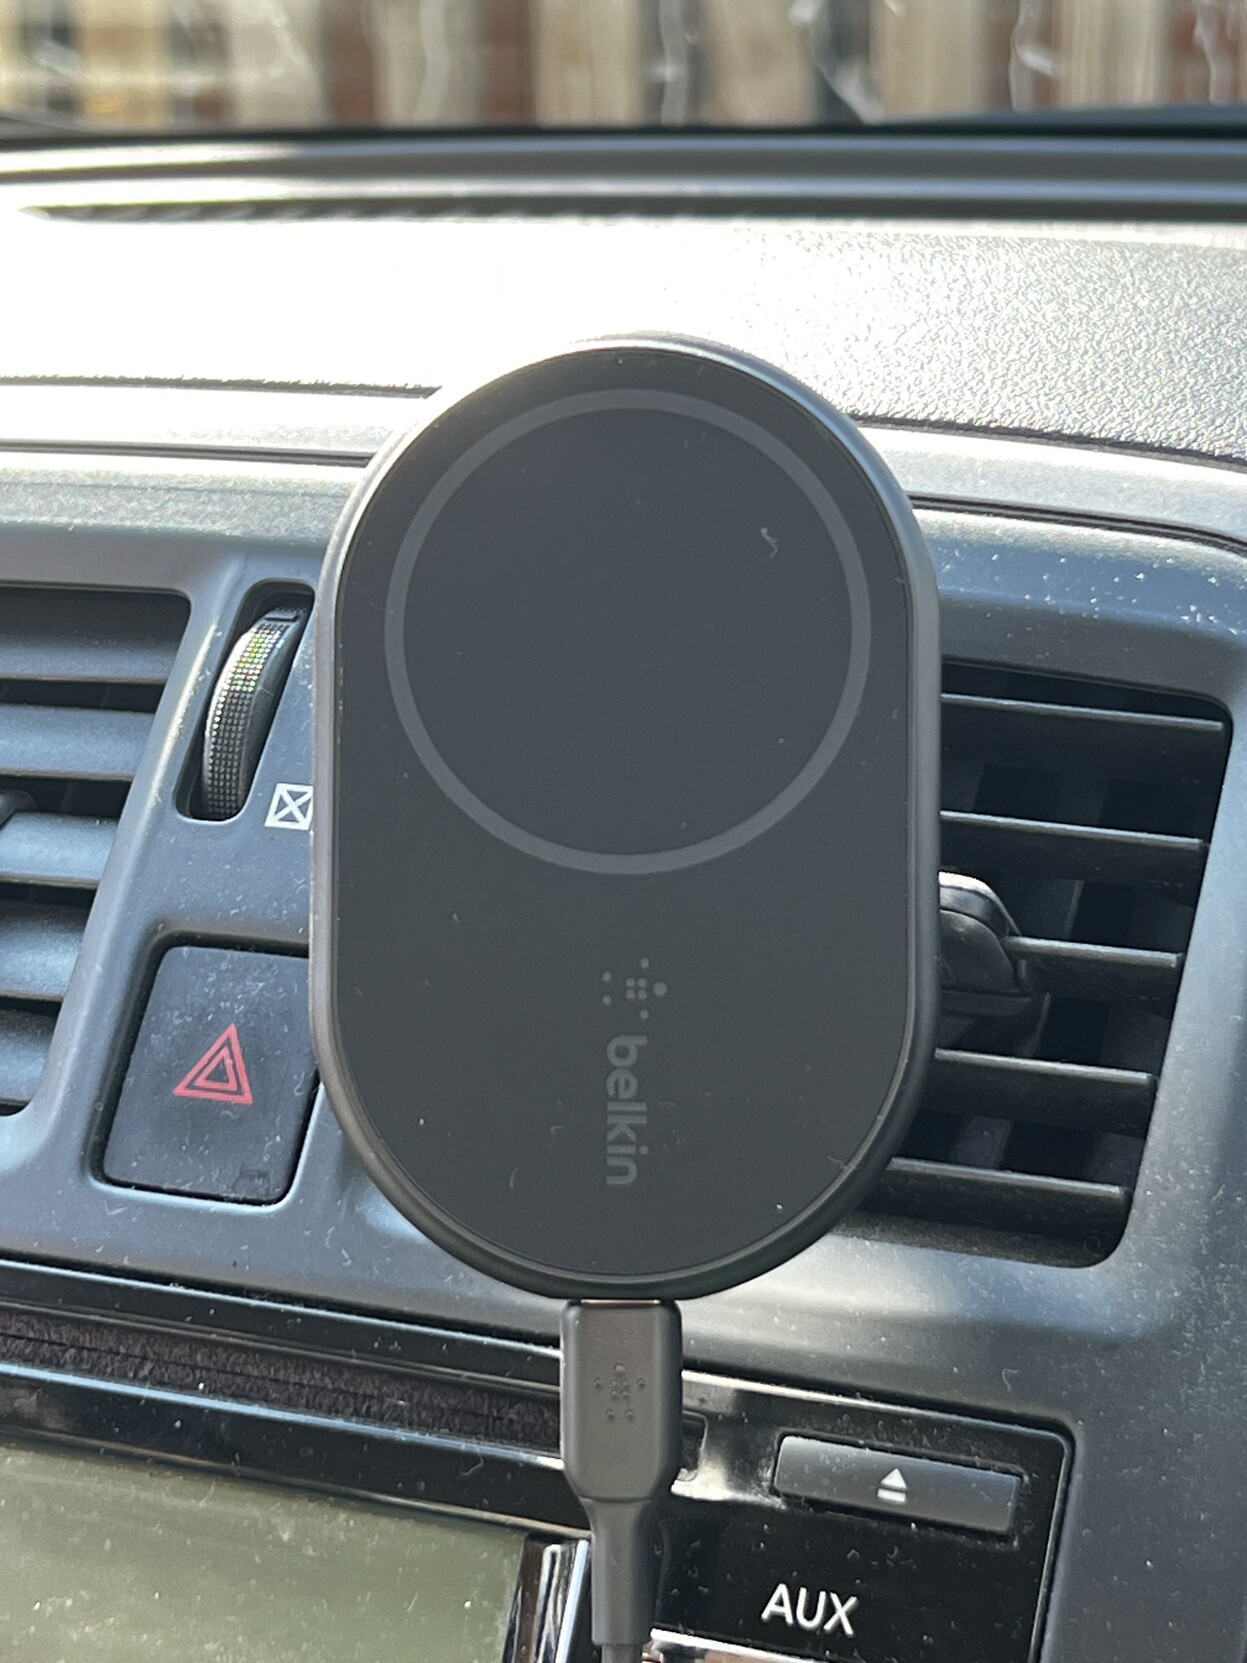 Belkin Magnetic Wireless Car Charger brings low-profile charging